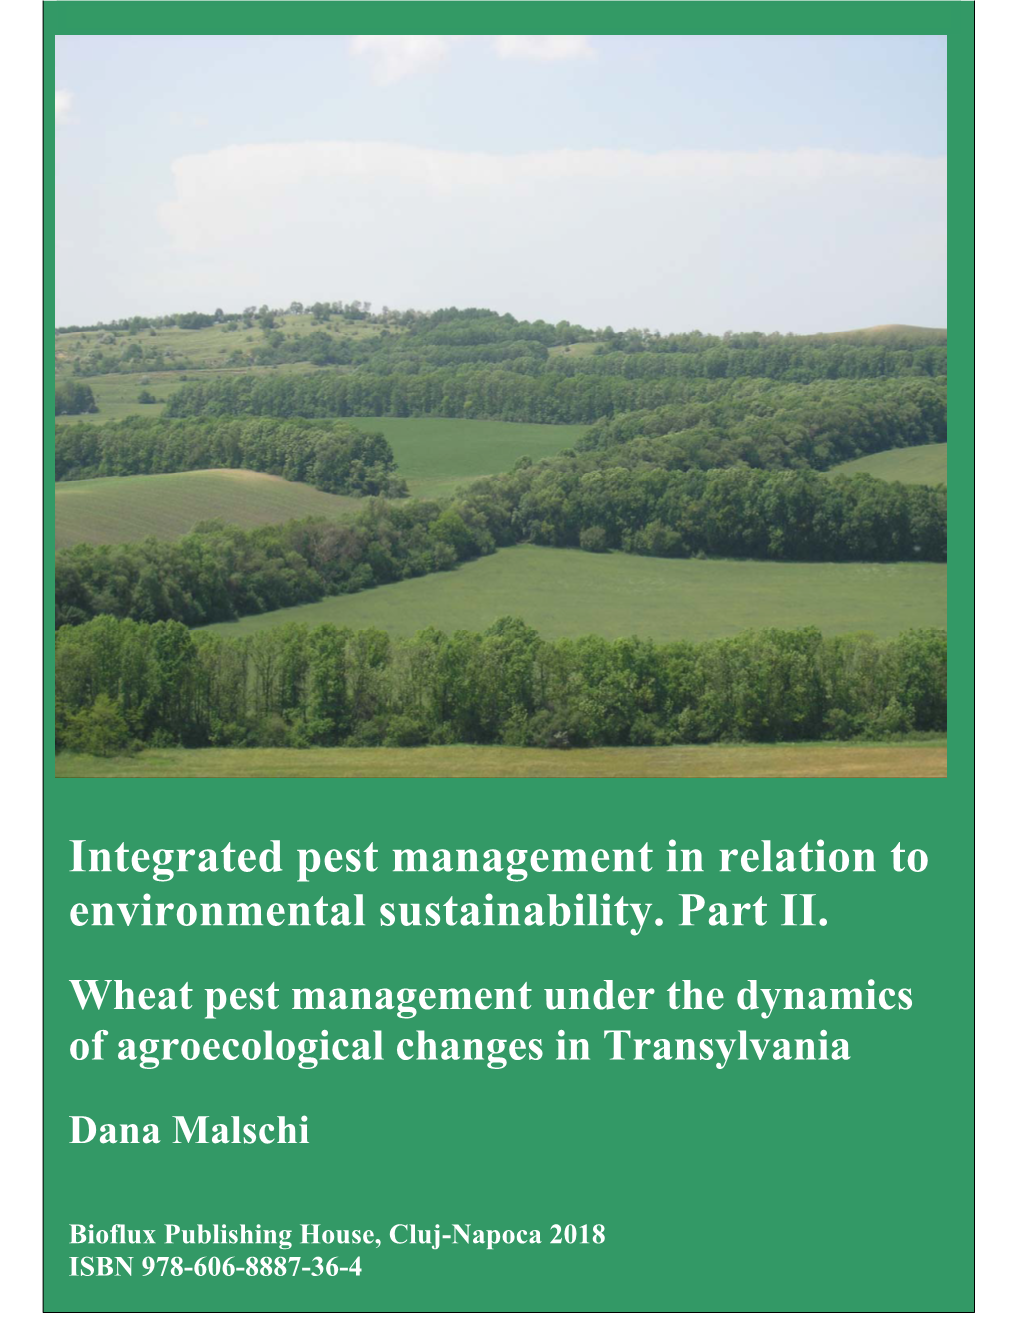 Integrated Pest Management in Relation to Environmental Sustainability